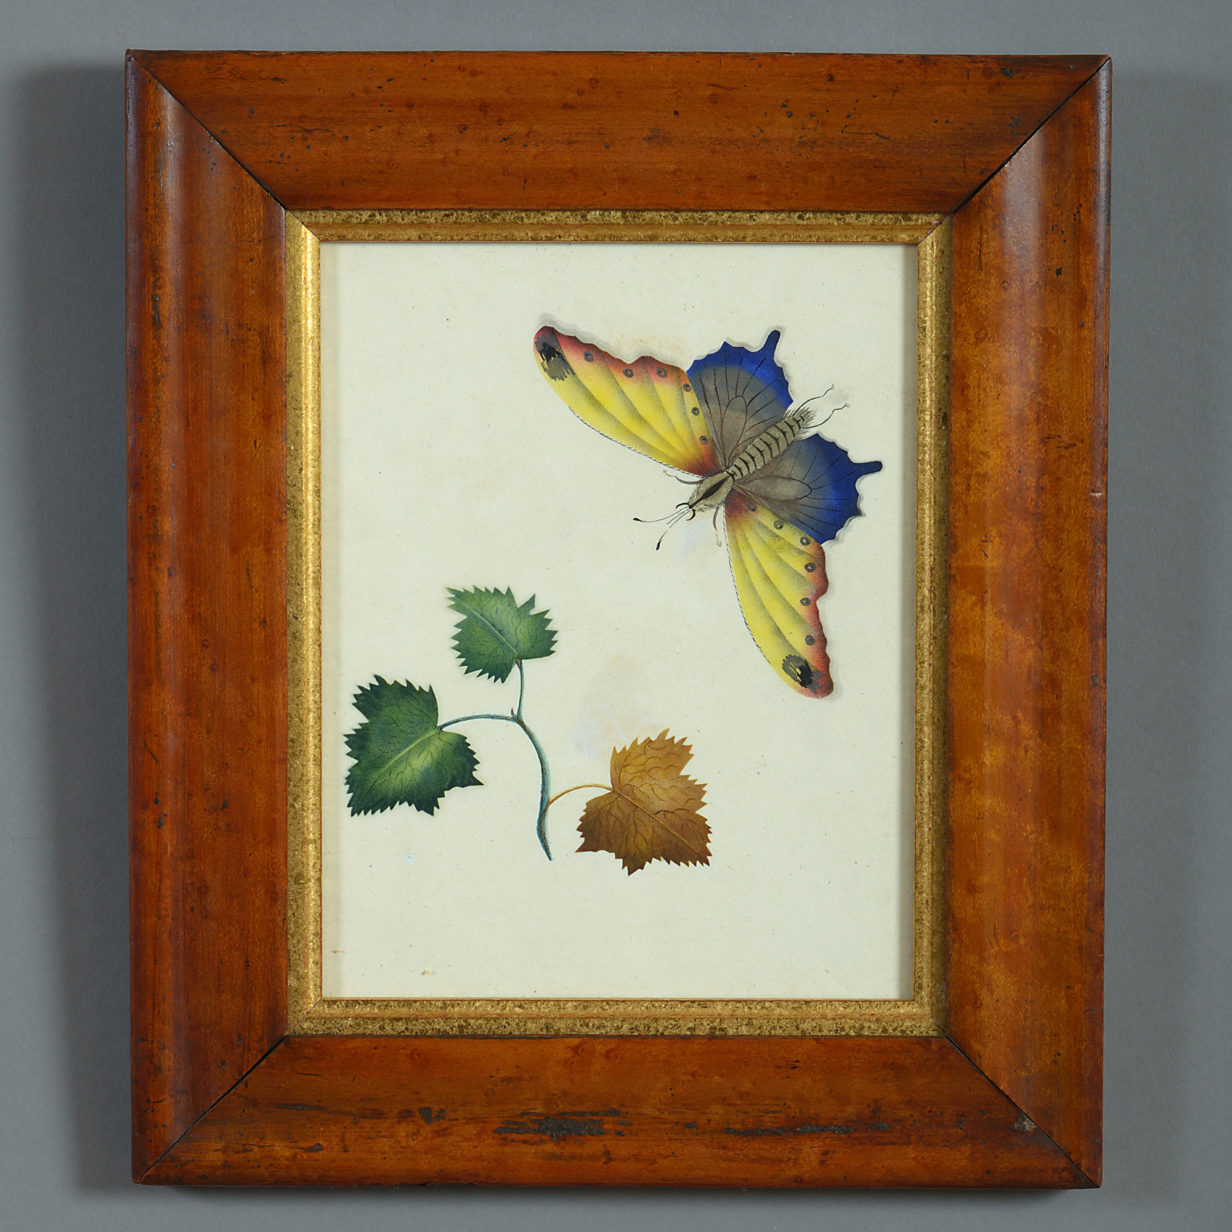 Mid-19th century watercolour of a butterfly and leaves